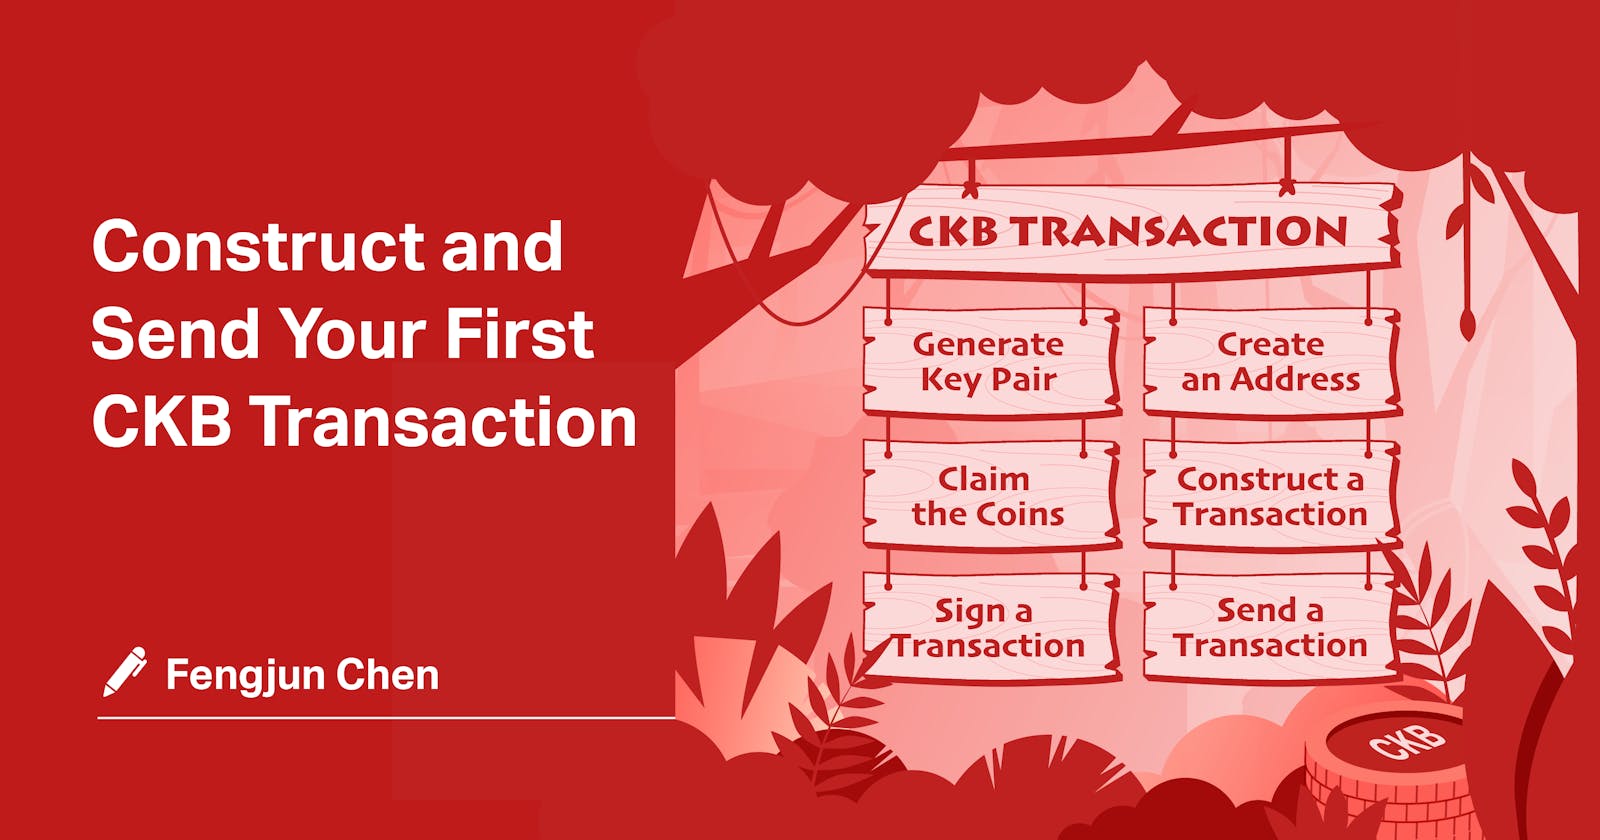 Construct and Send Your First CKB Transaction